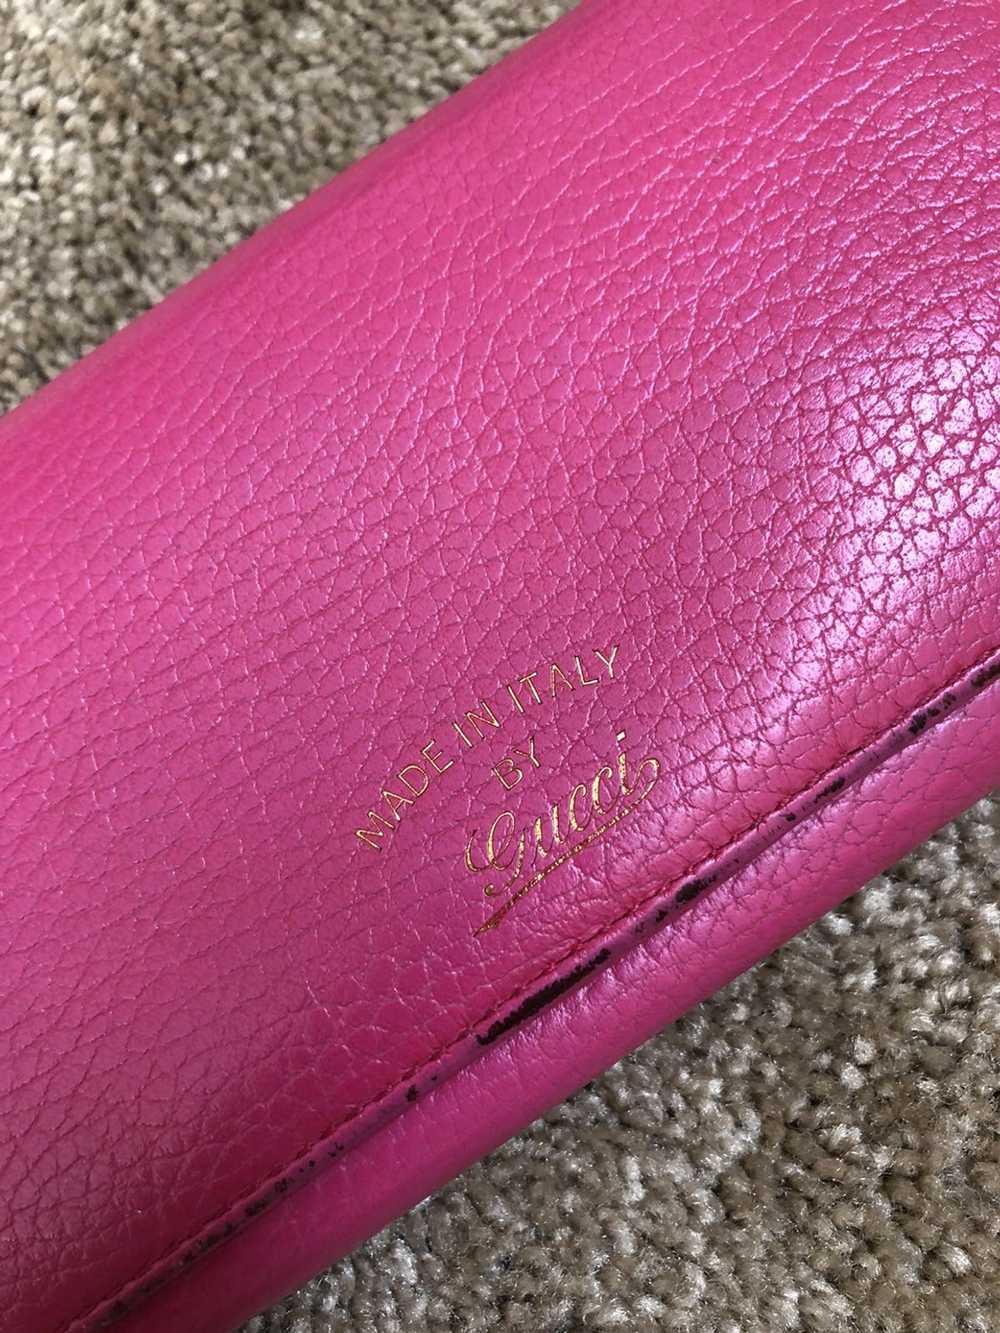 Gucci Gucci pink leather long wallet - image 2